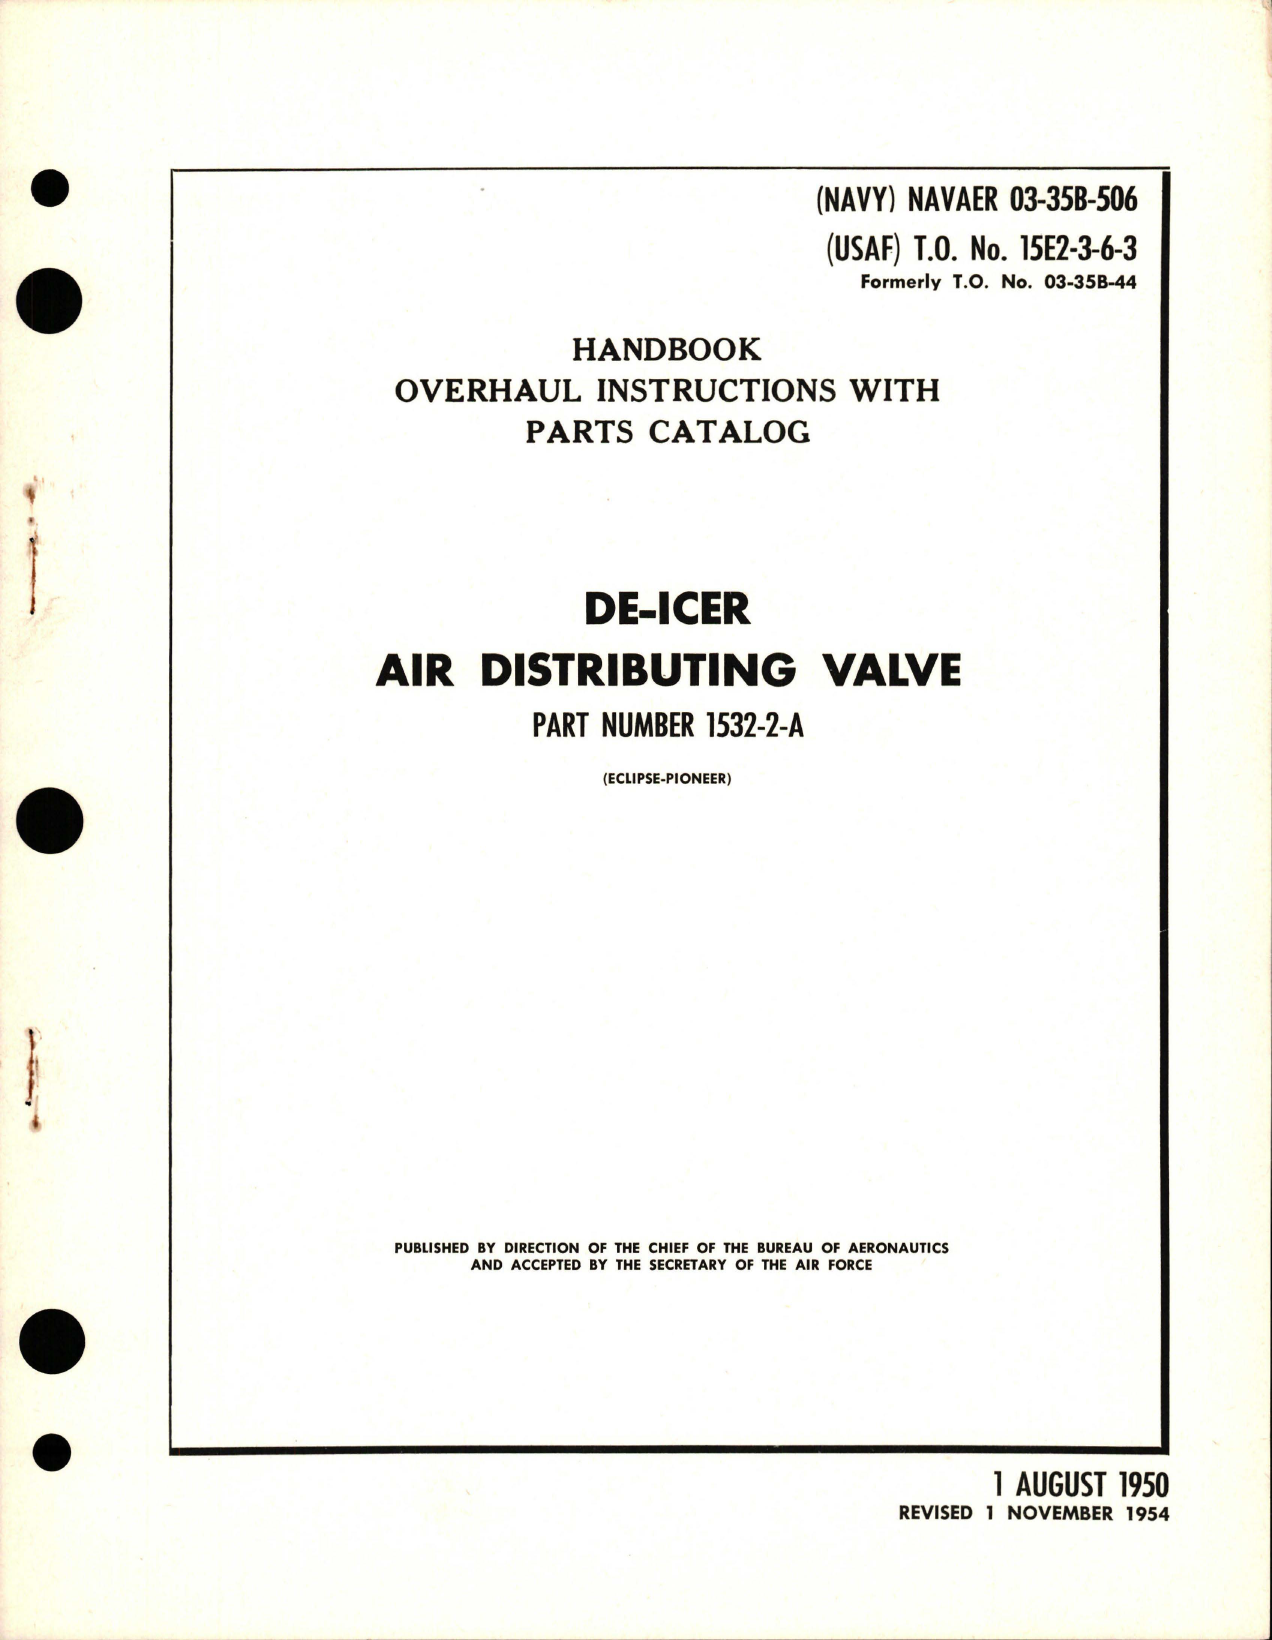 Sample page 1 from AirCorps Library document: Overhaul Instructions with Parts Catalog for De-Icer Air Distributing Valve - Part 1532-2-A 